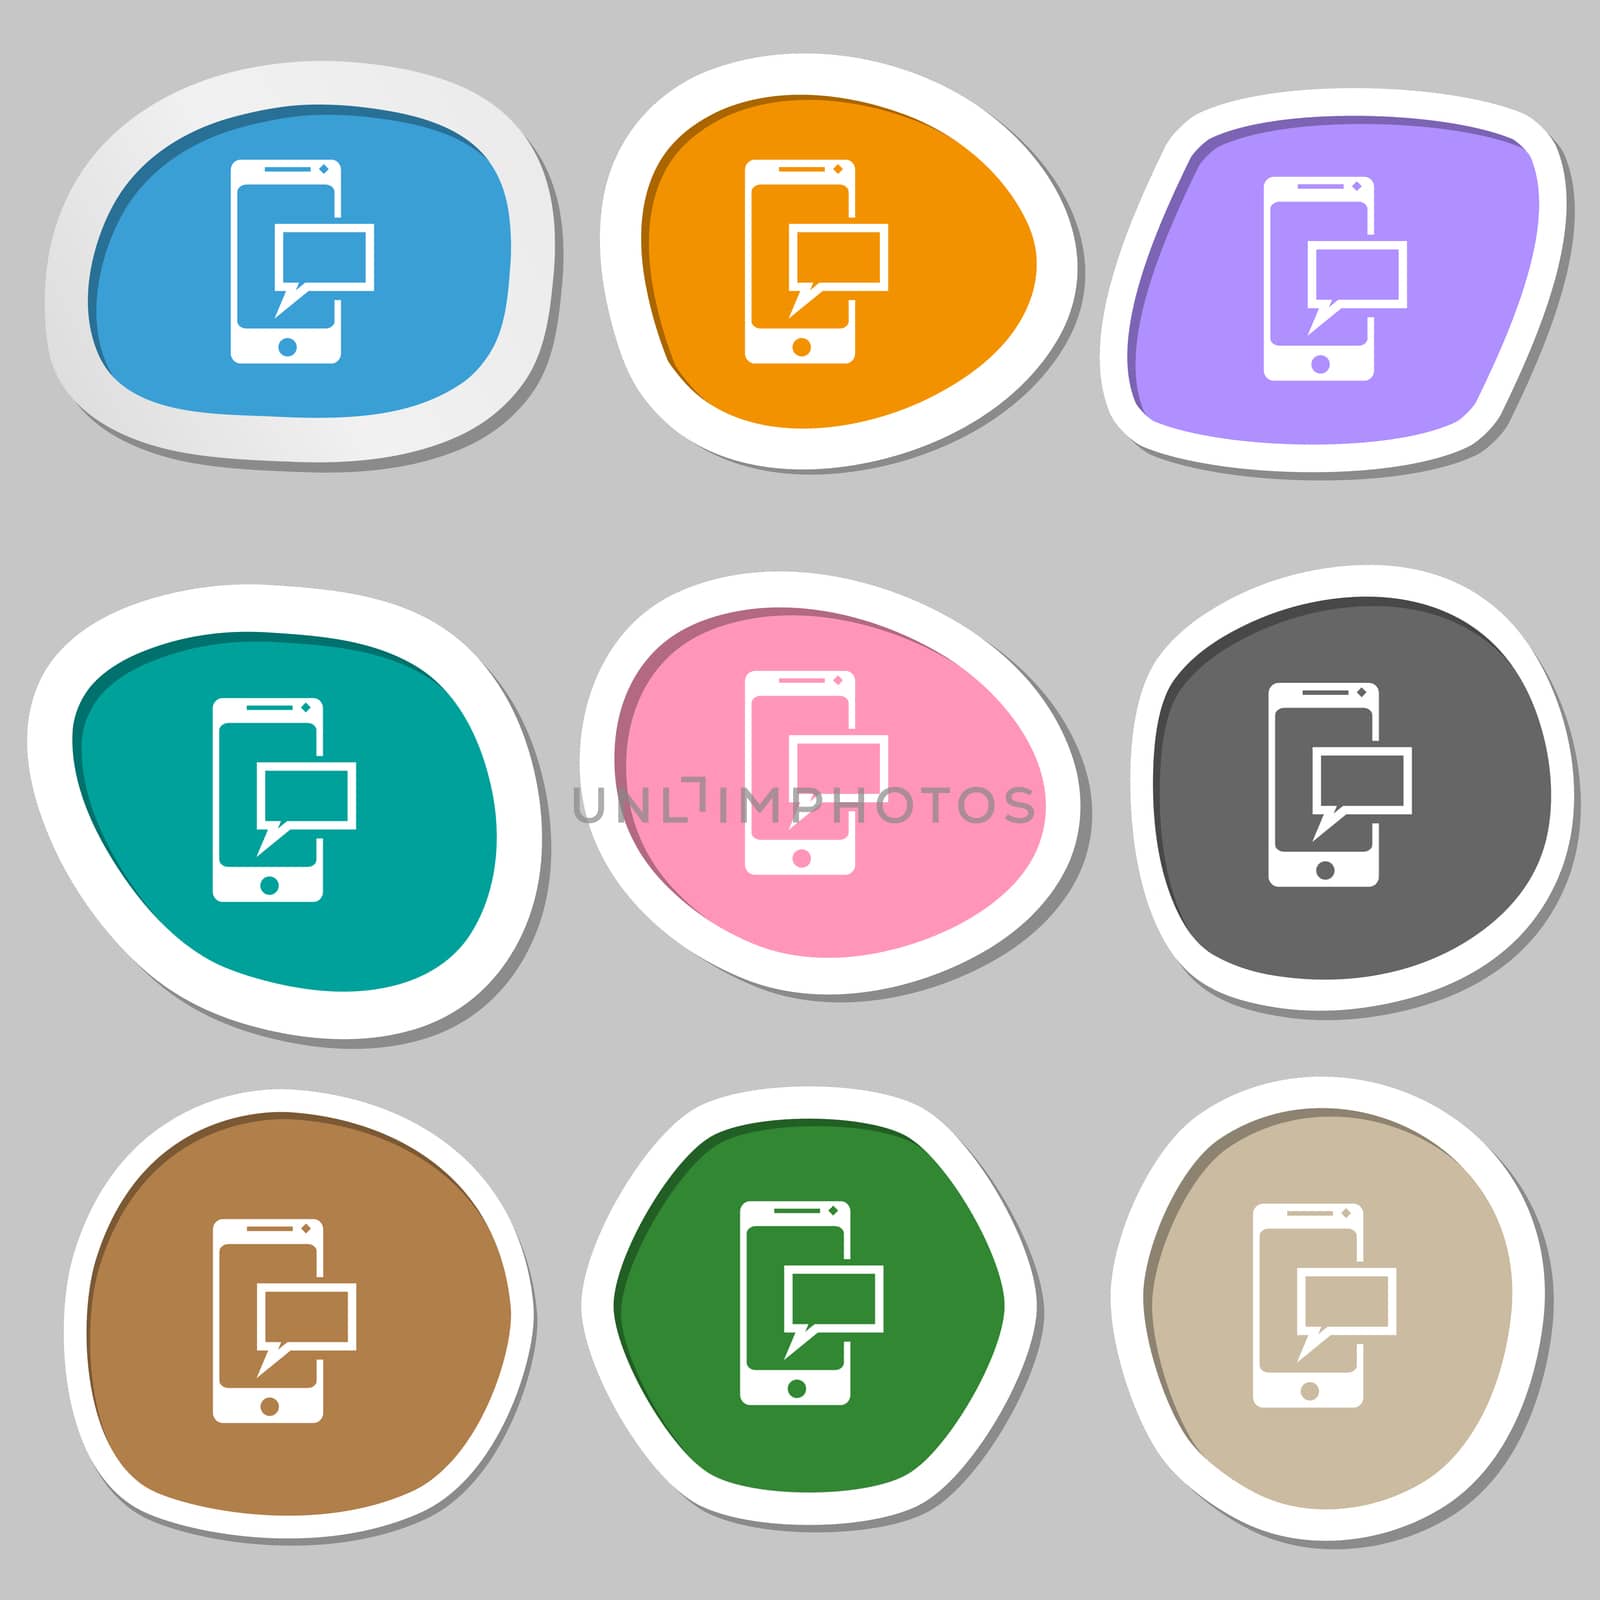 Mail icon. Envelope symbol. Message sms sign. Mail navigation button. Multicolored paper stickers. illustration